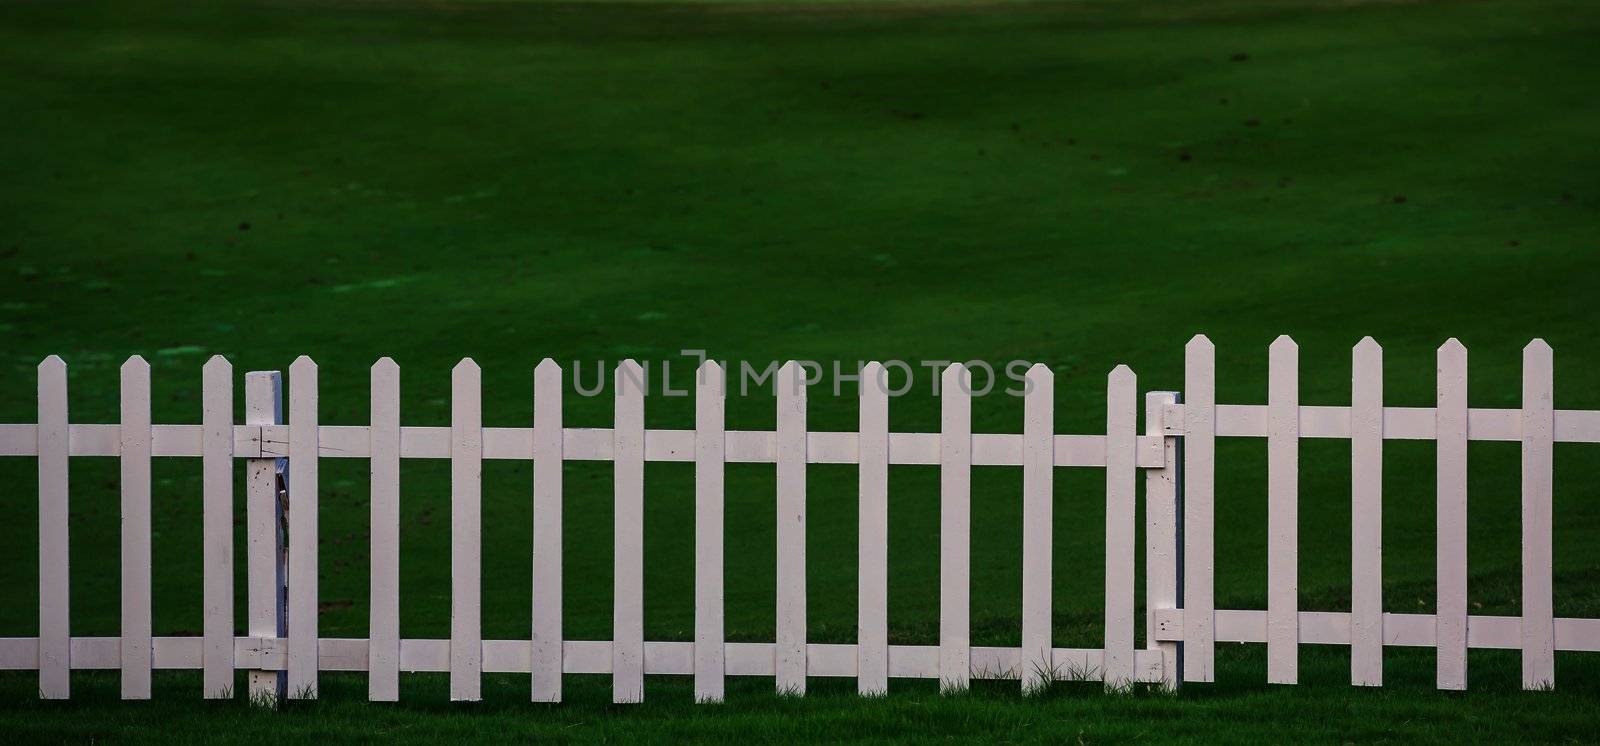 Lawn and fence by smuay